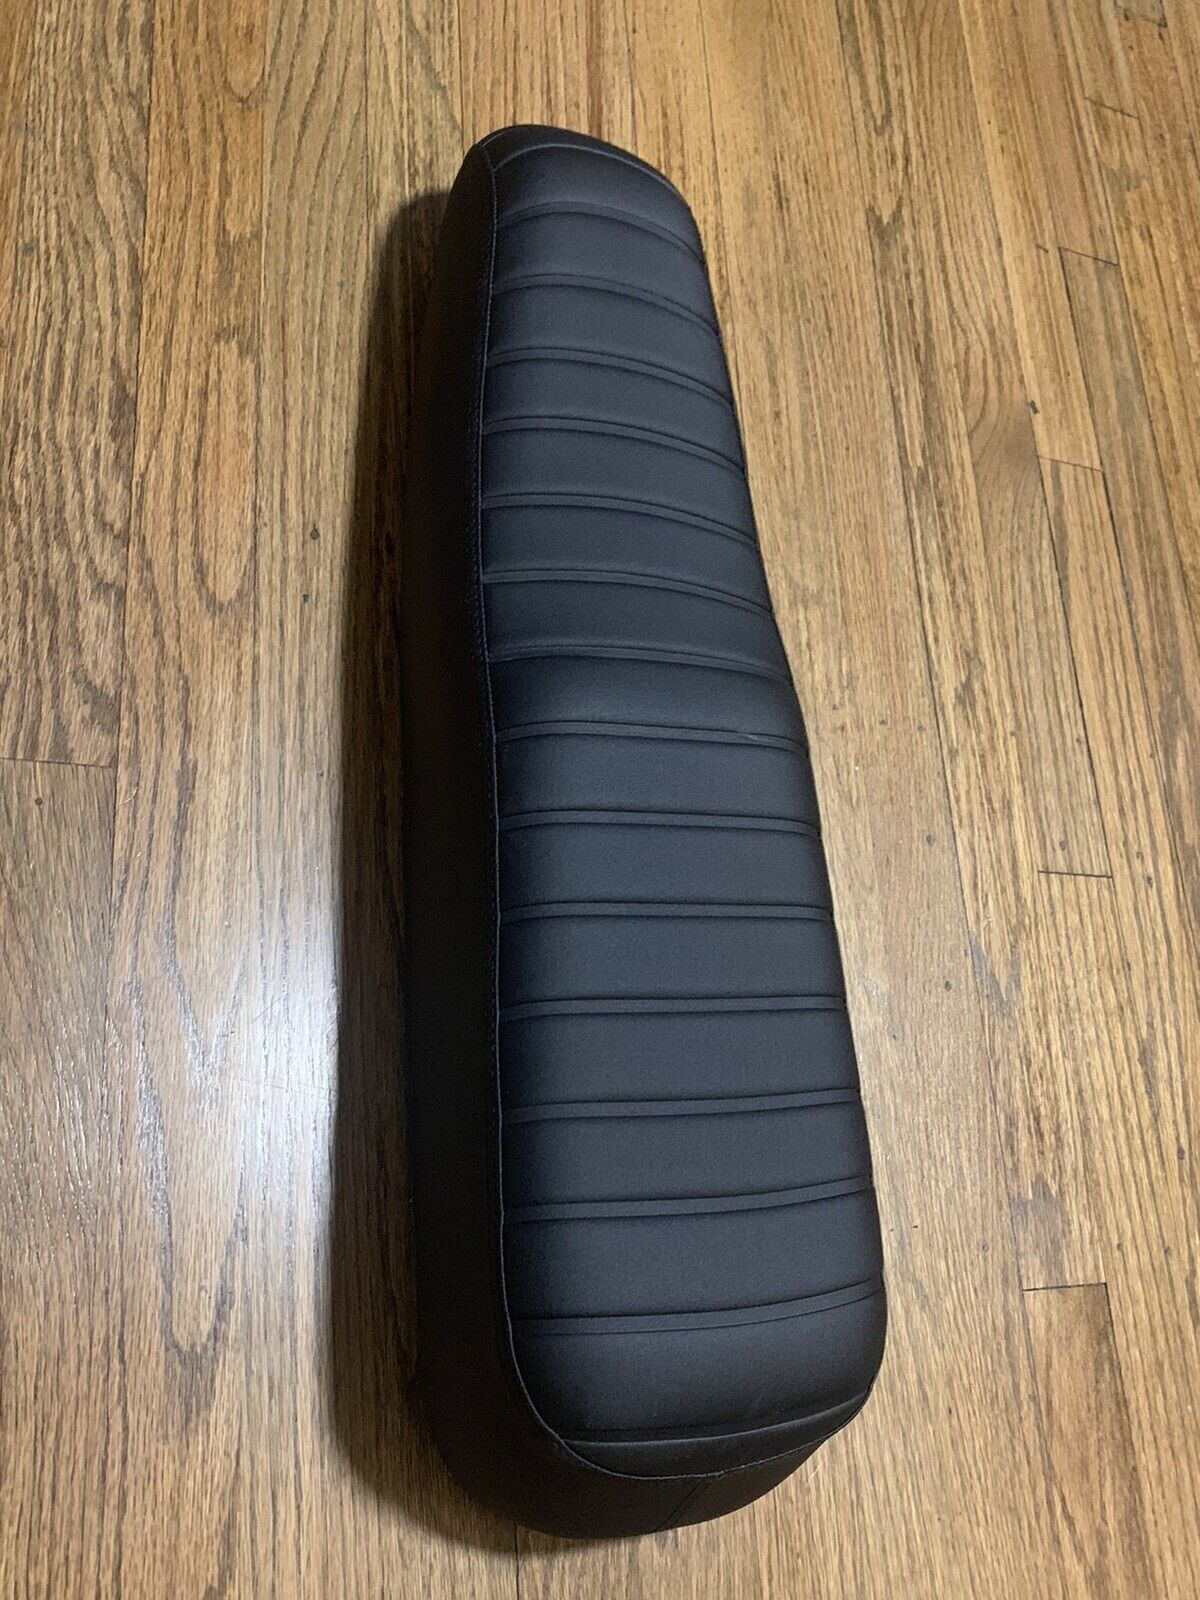 Ariel  E-bike Seat For X Class And Grizzly